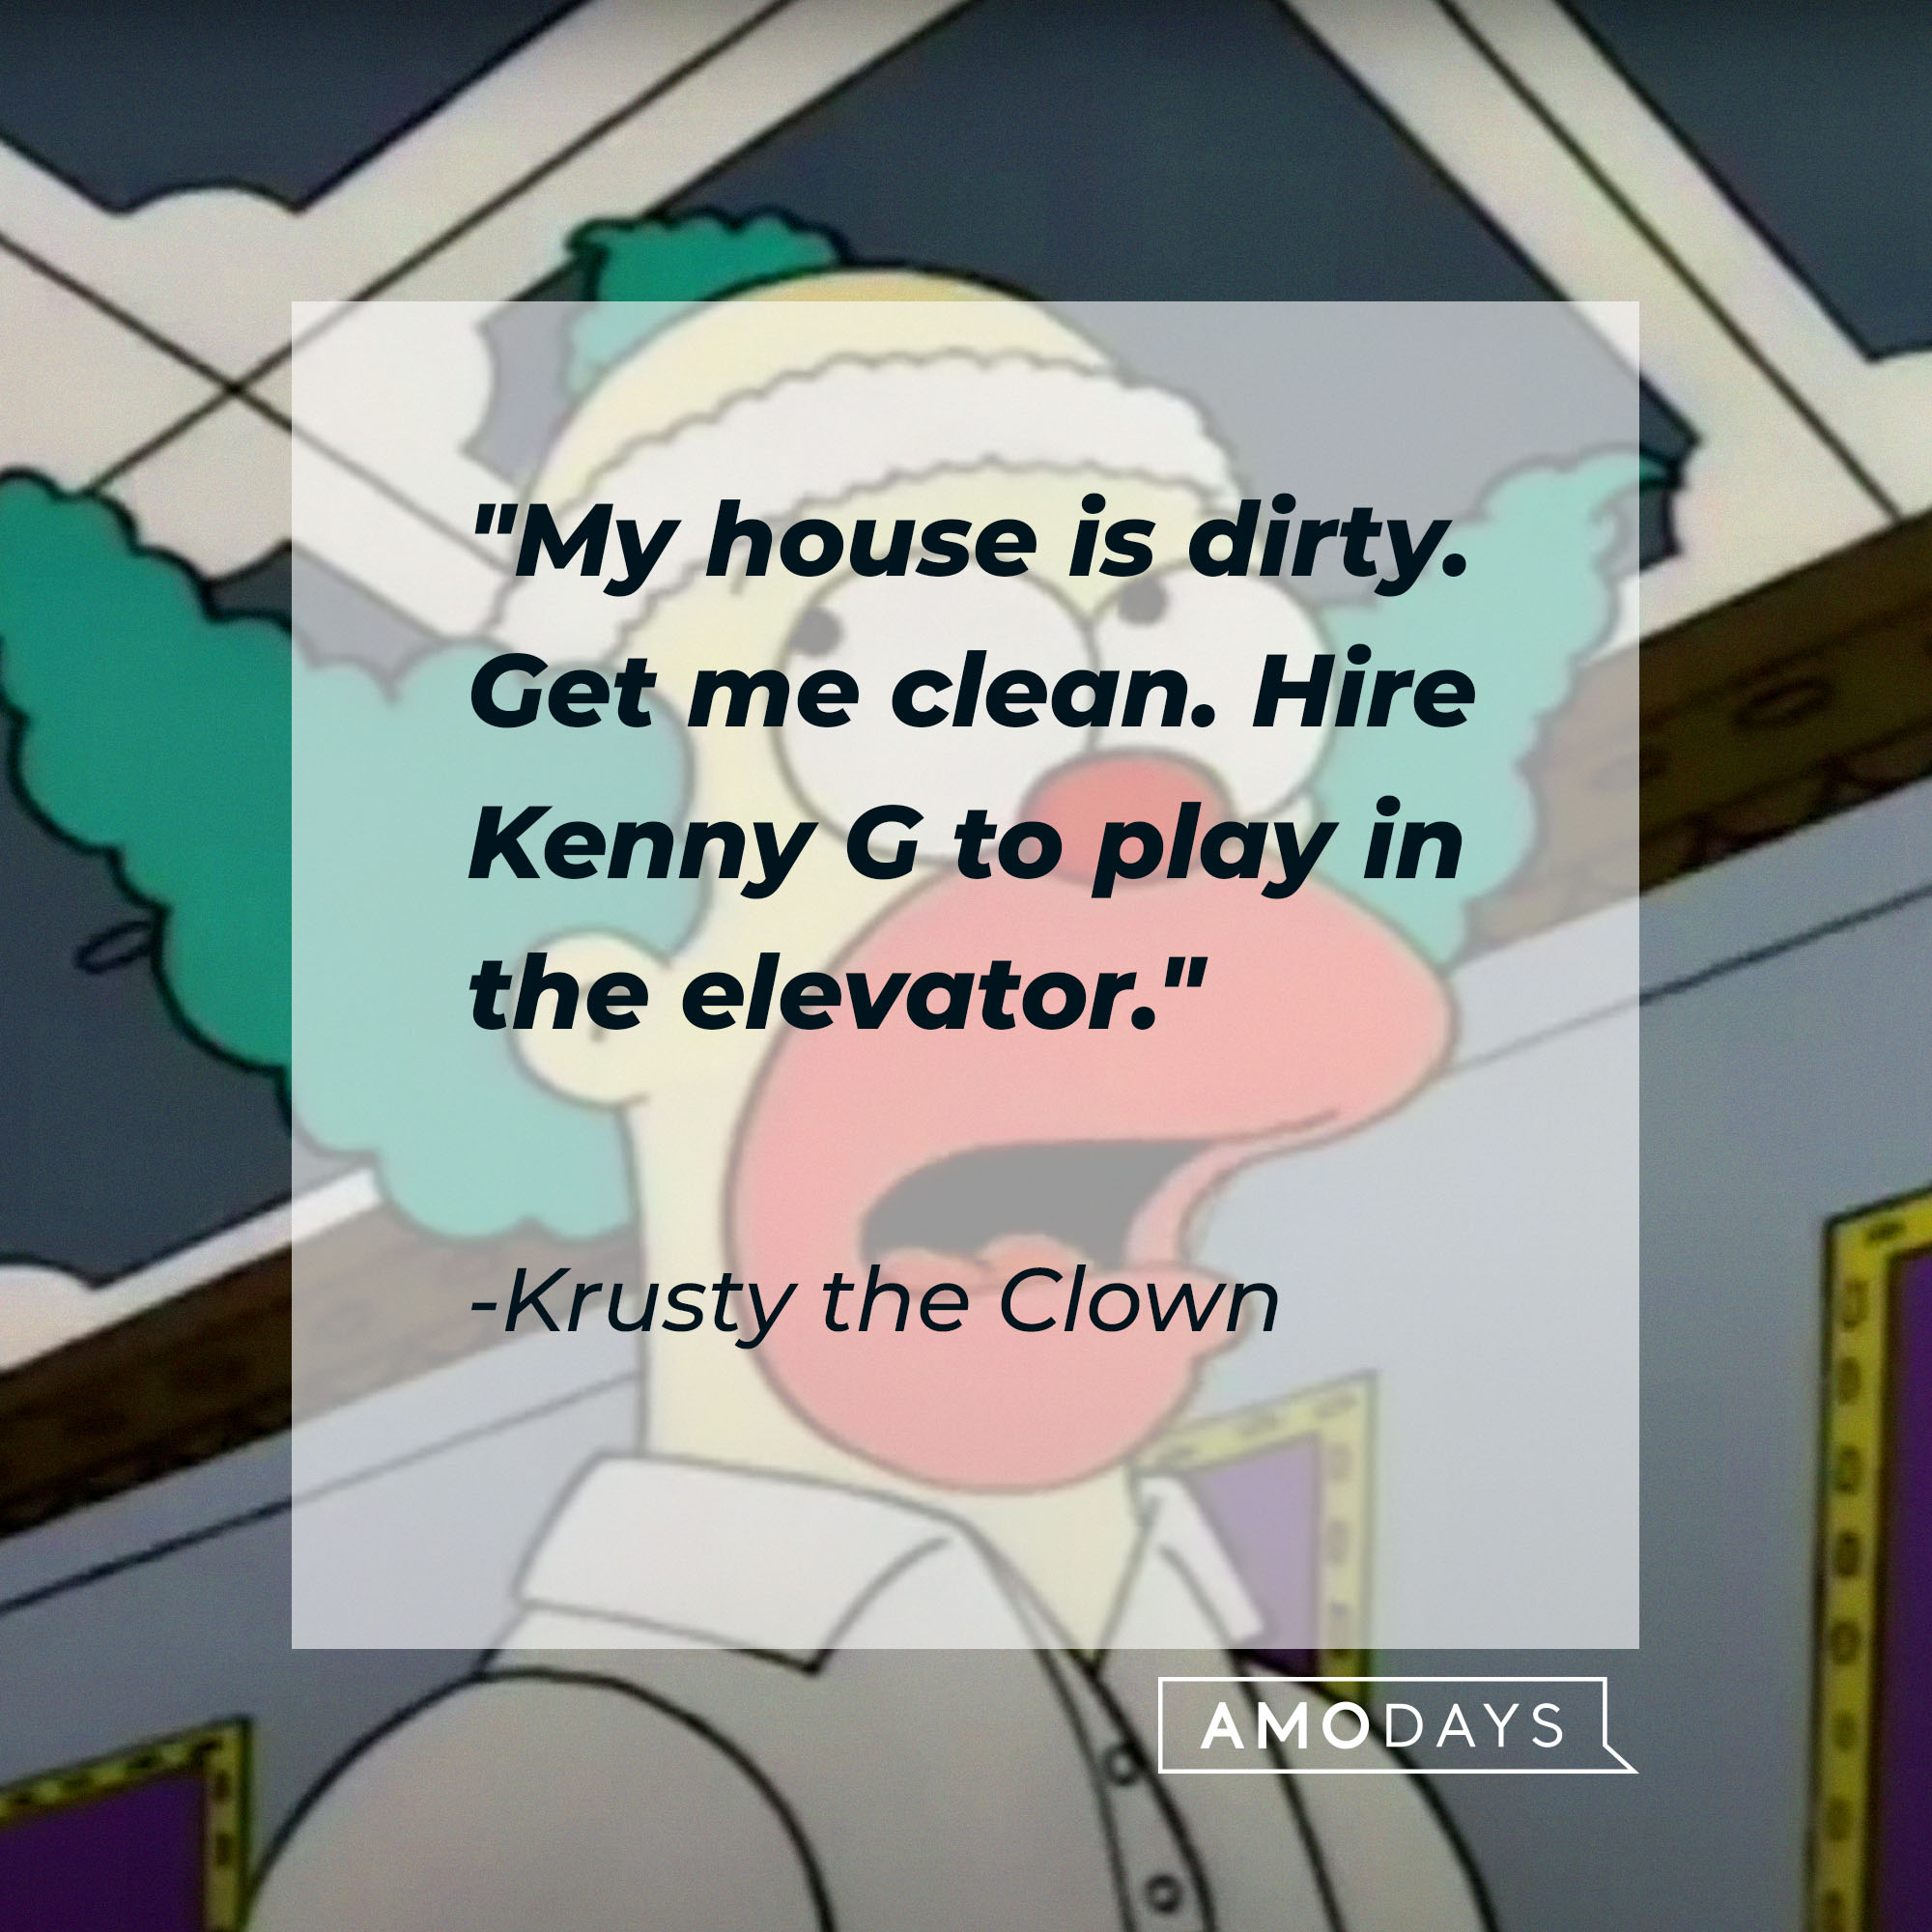 Krusty the Clown's quote: "My house is dirty. Get me clean. Hire Kenny G to play in the elevator" | Source: Facebook.com/TheSimpsons